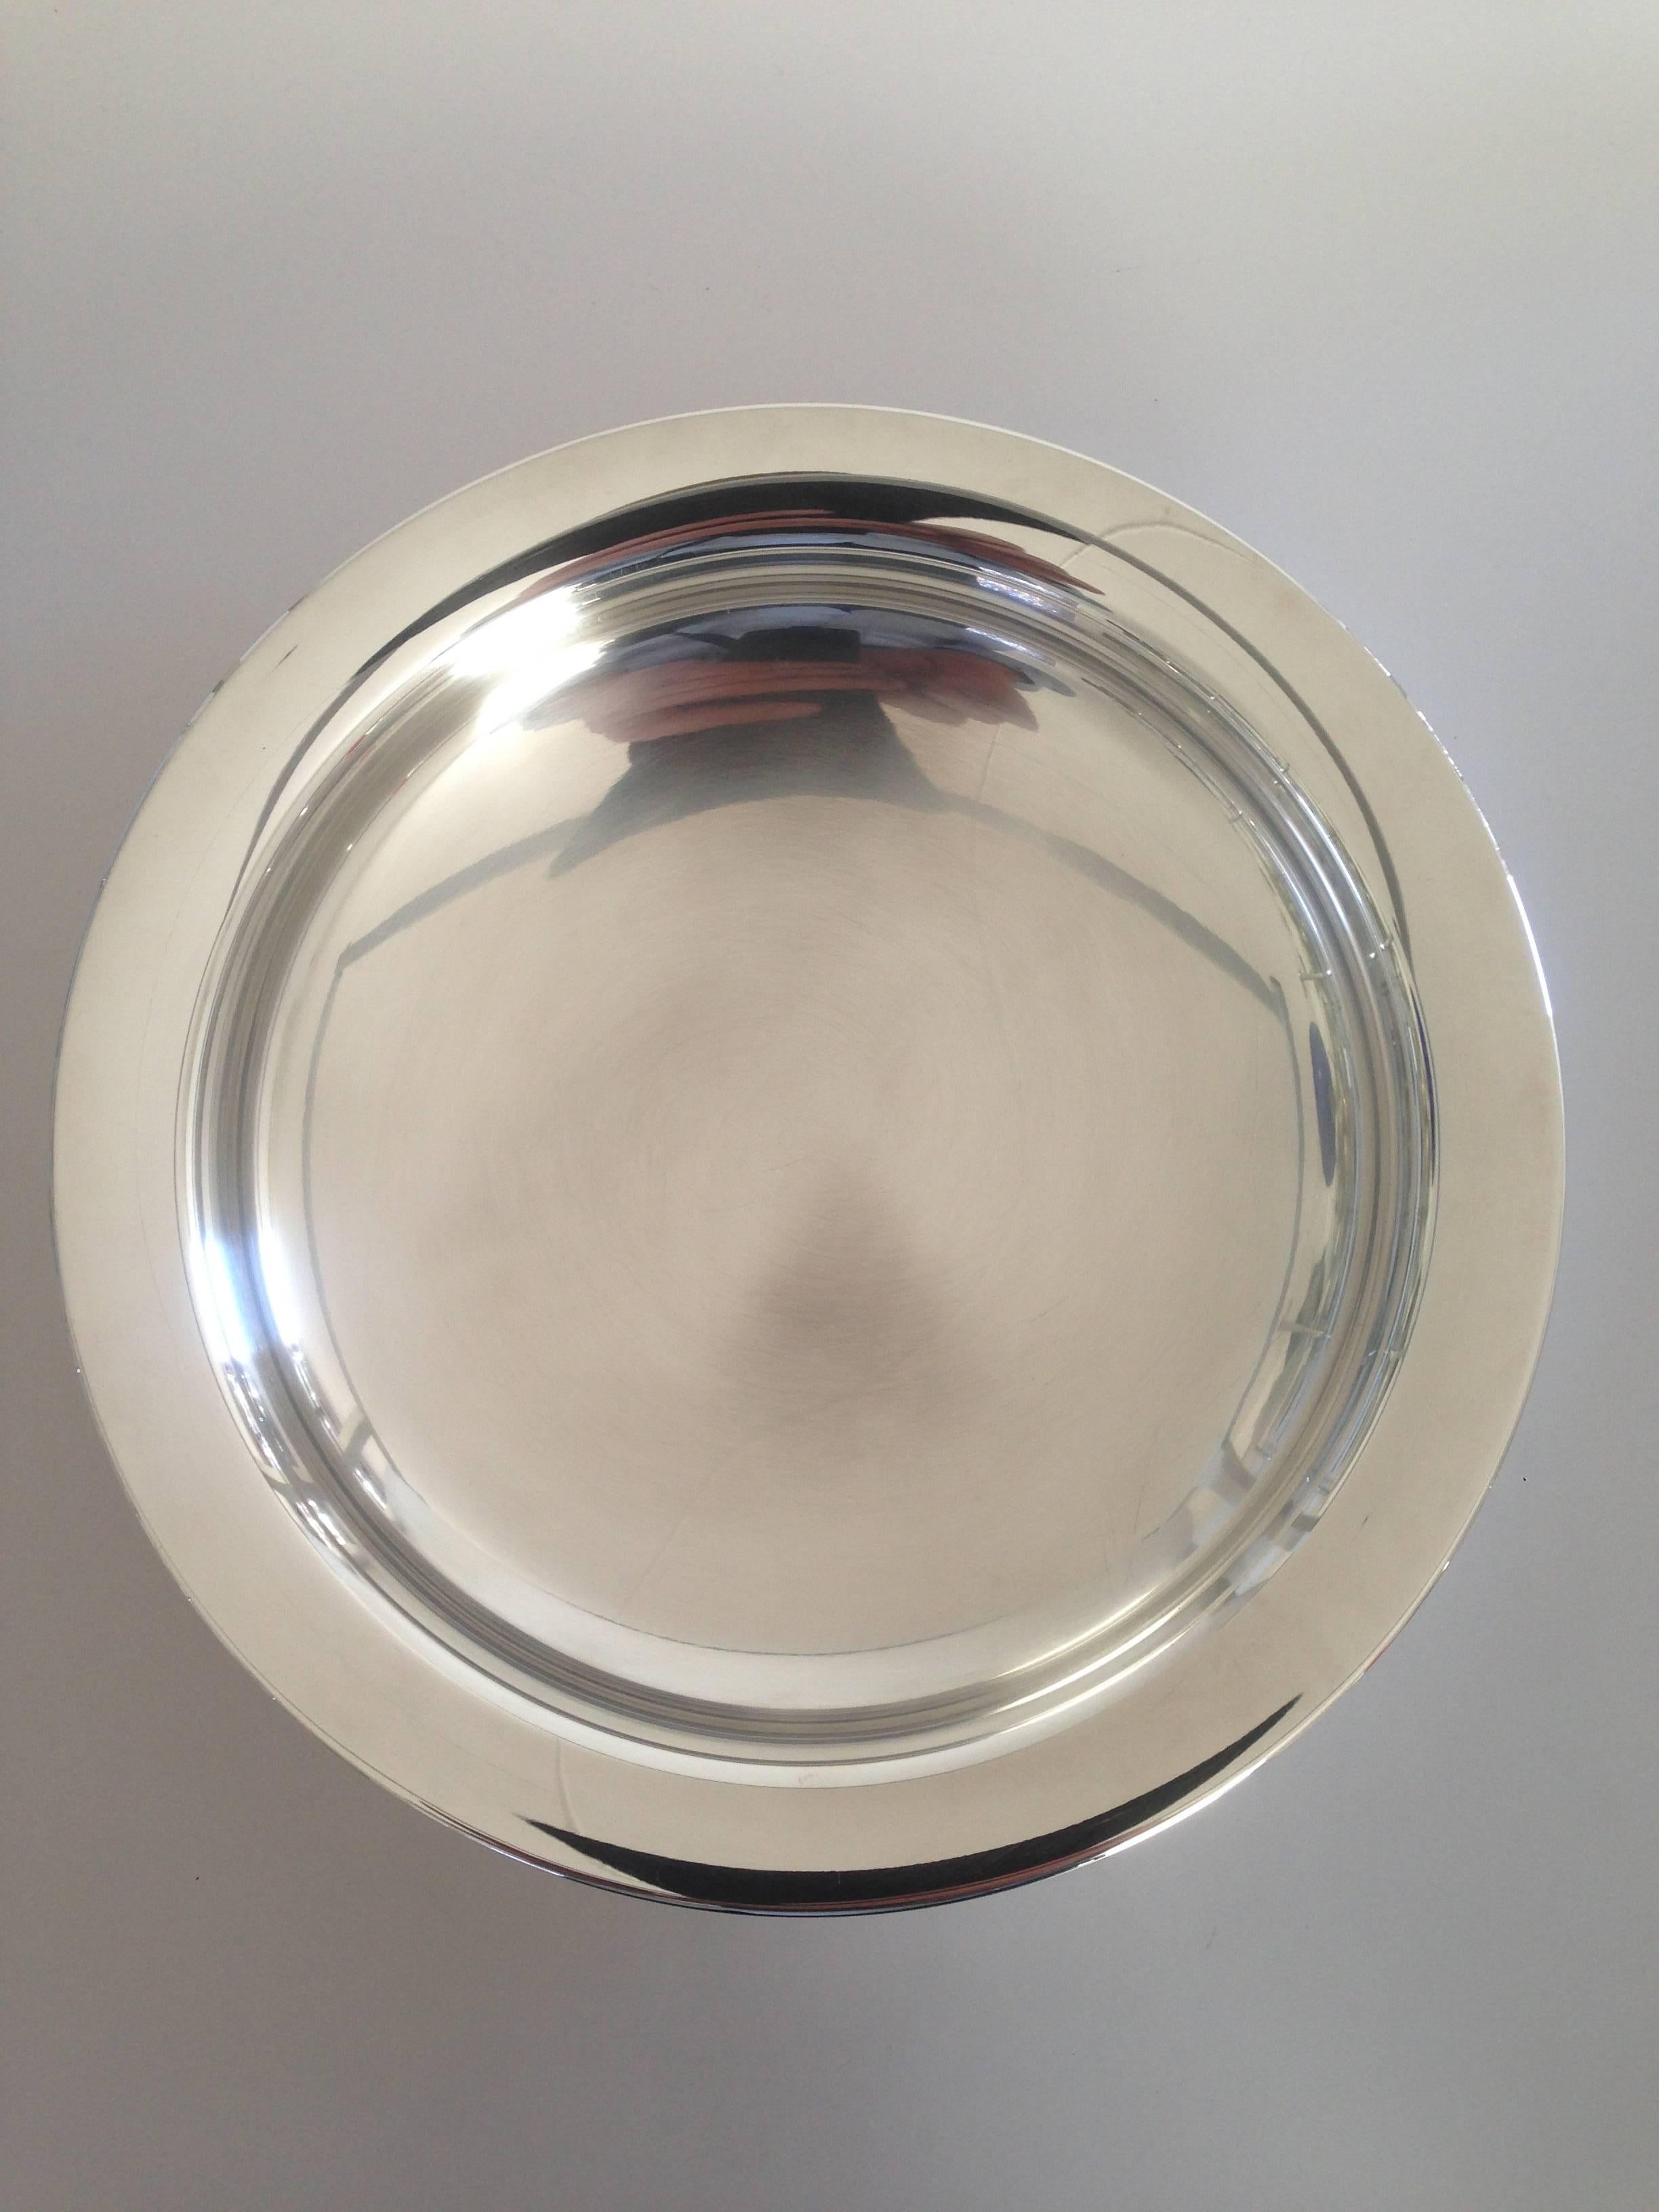 Georg Jensen Sterling Silver Bowl designed by Alev Siesbye #1292.

Is from 1989.

Measures 32,5cm / 12 4/5